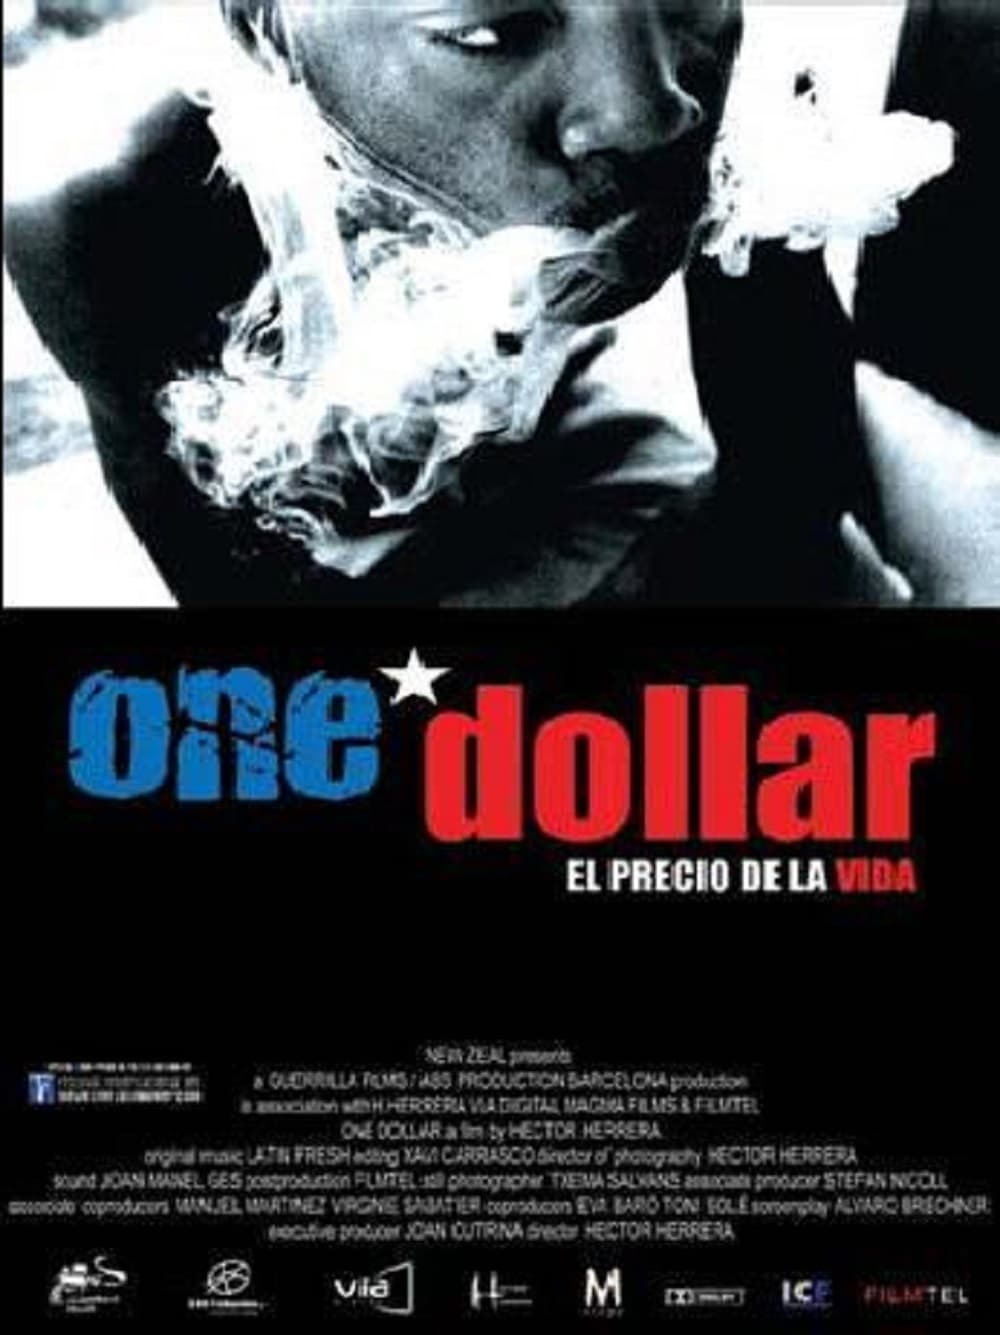 One Dollar (The Price of Life)